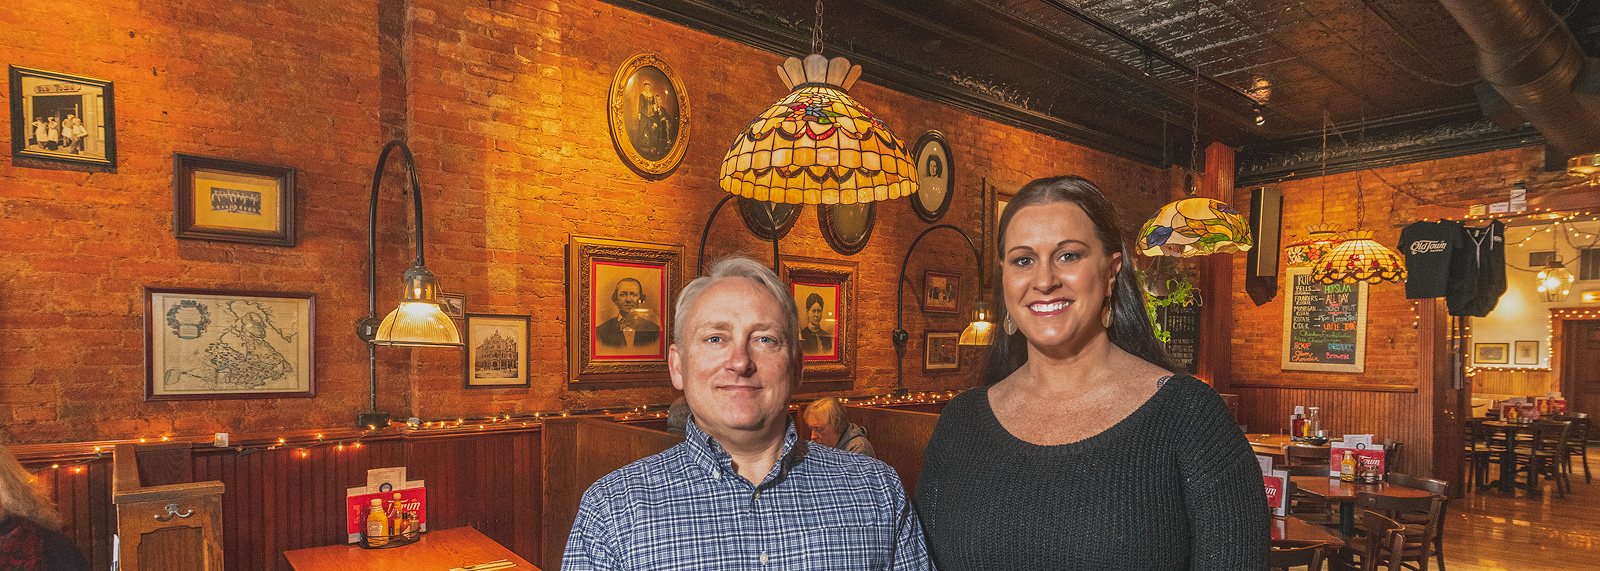 Old Town Tavern Owner Chris Pawlicki and manager Theresa McCarter